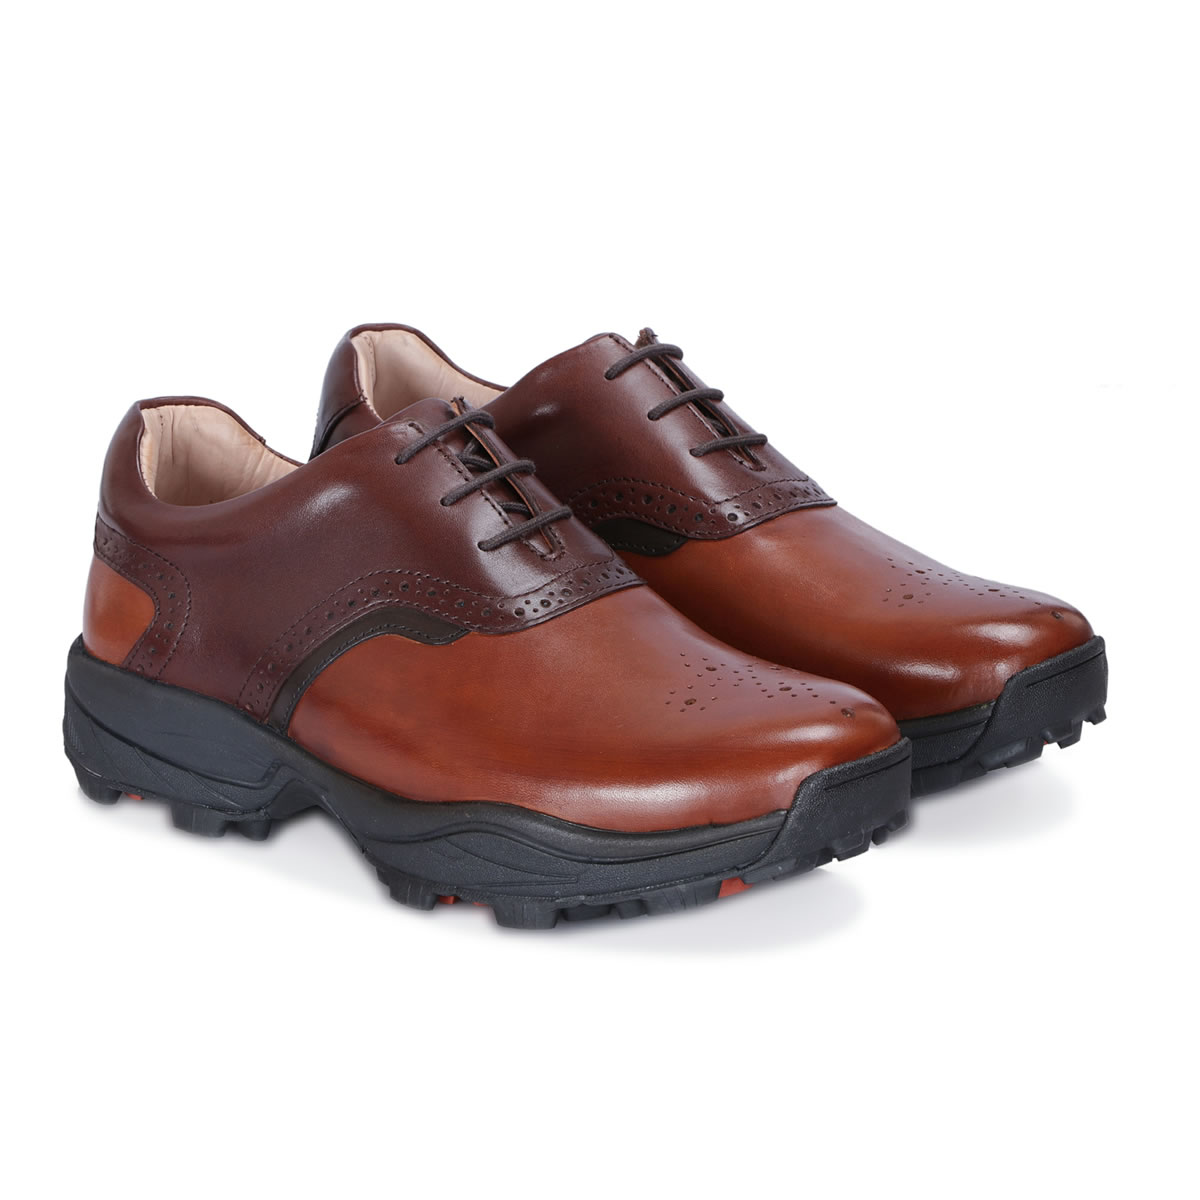 Briston Tan Spikeless Golf Shoes | East Star Shoes – ESS Shoes